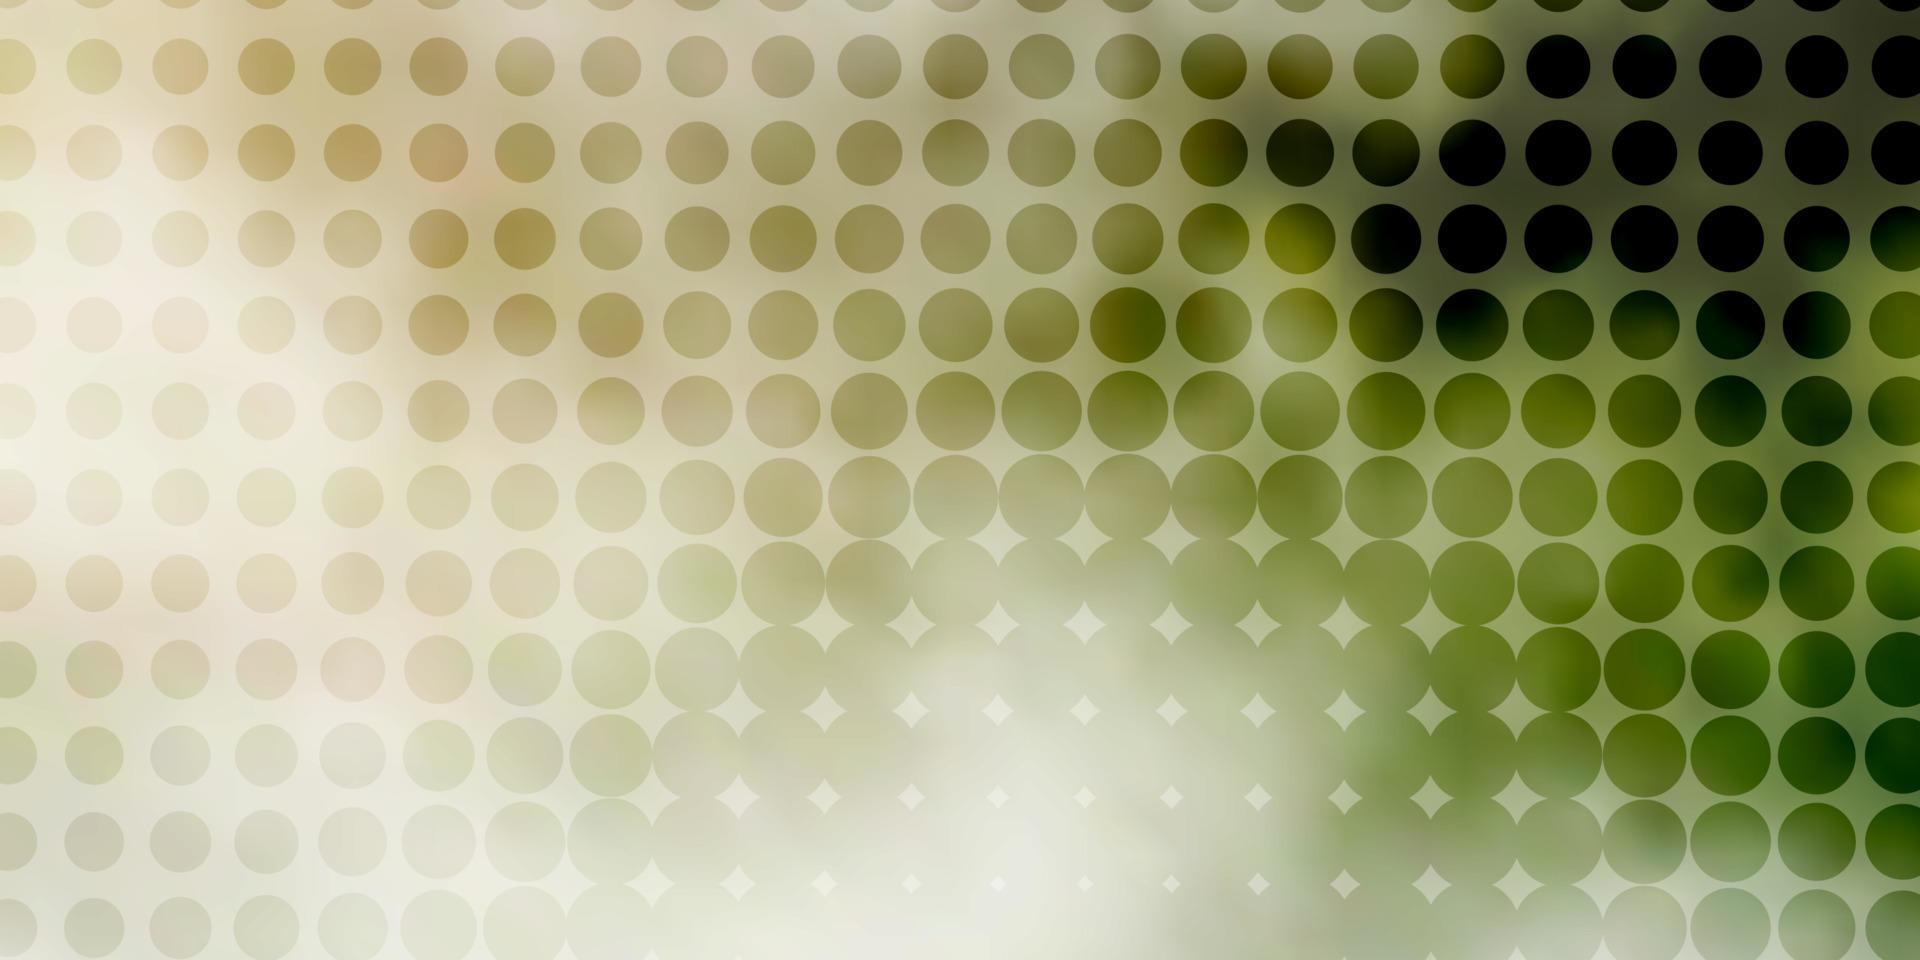 Light Gray vector layout with circle shapes.